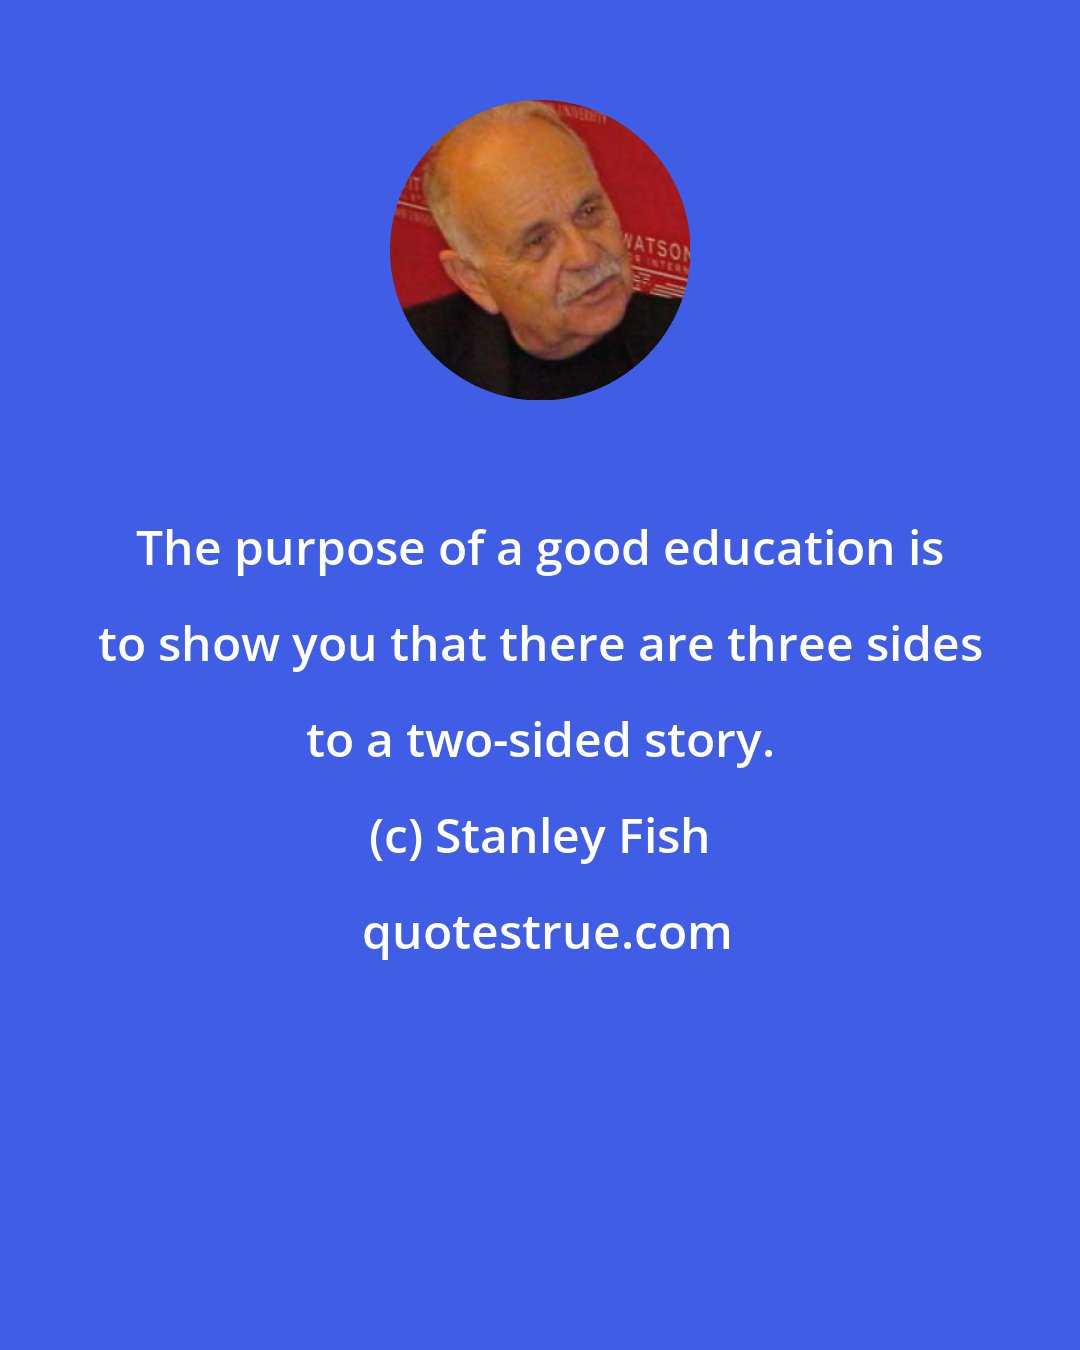 Stanley Fish: The purpose of a good education is to show you that there are three sides to a two-sided story.